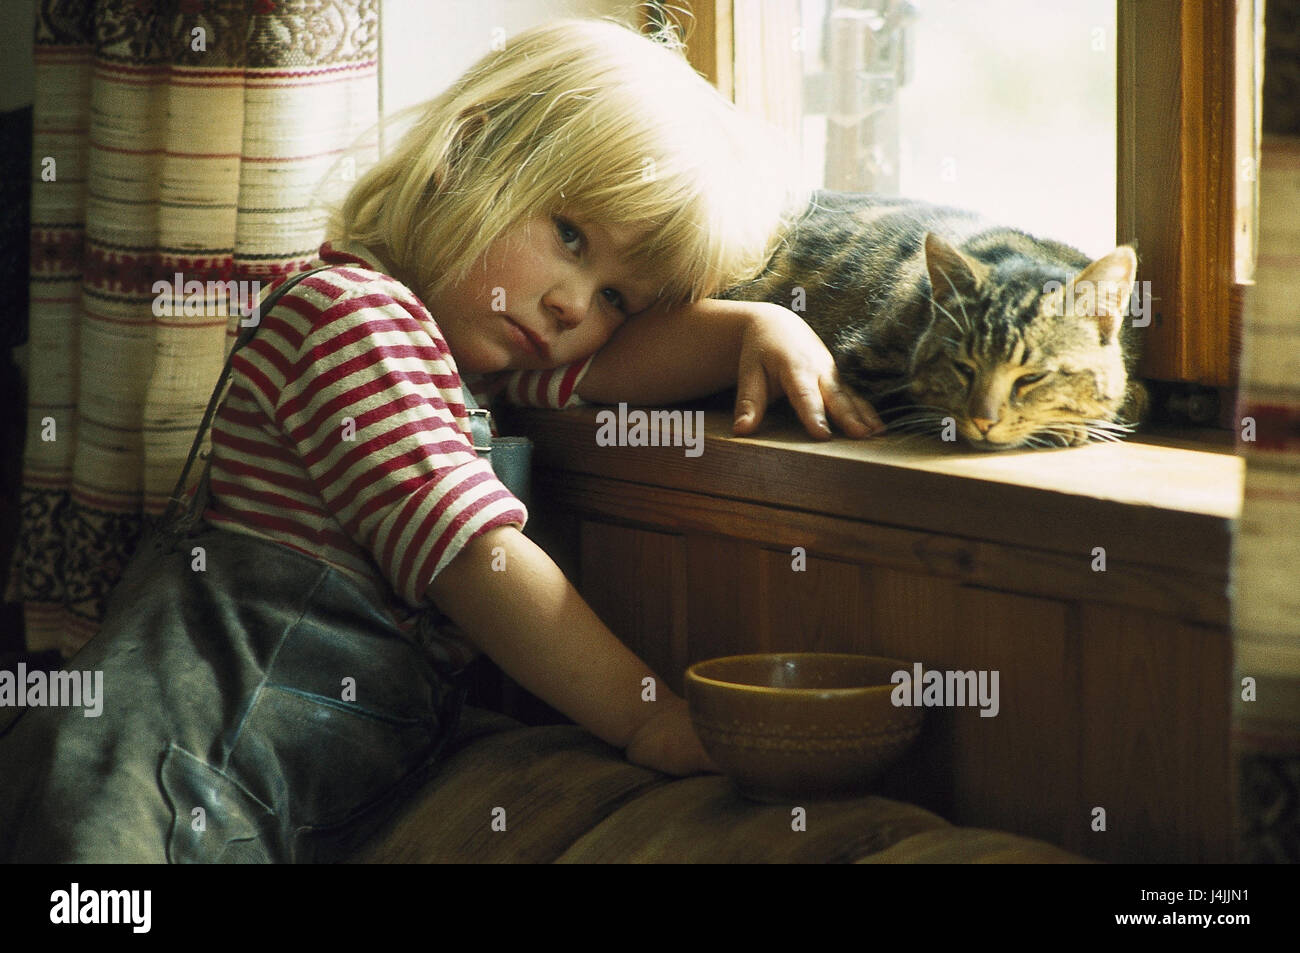 Cuisine, detail, girl, sadly, windowsill, cat child, infant, childhood, unhappily, sadness, only, lonely, loneliness, need love and affection, animal, animals, pet, pets, house cat, friendship, tuning, depresses, negatively Stock Photo